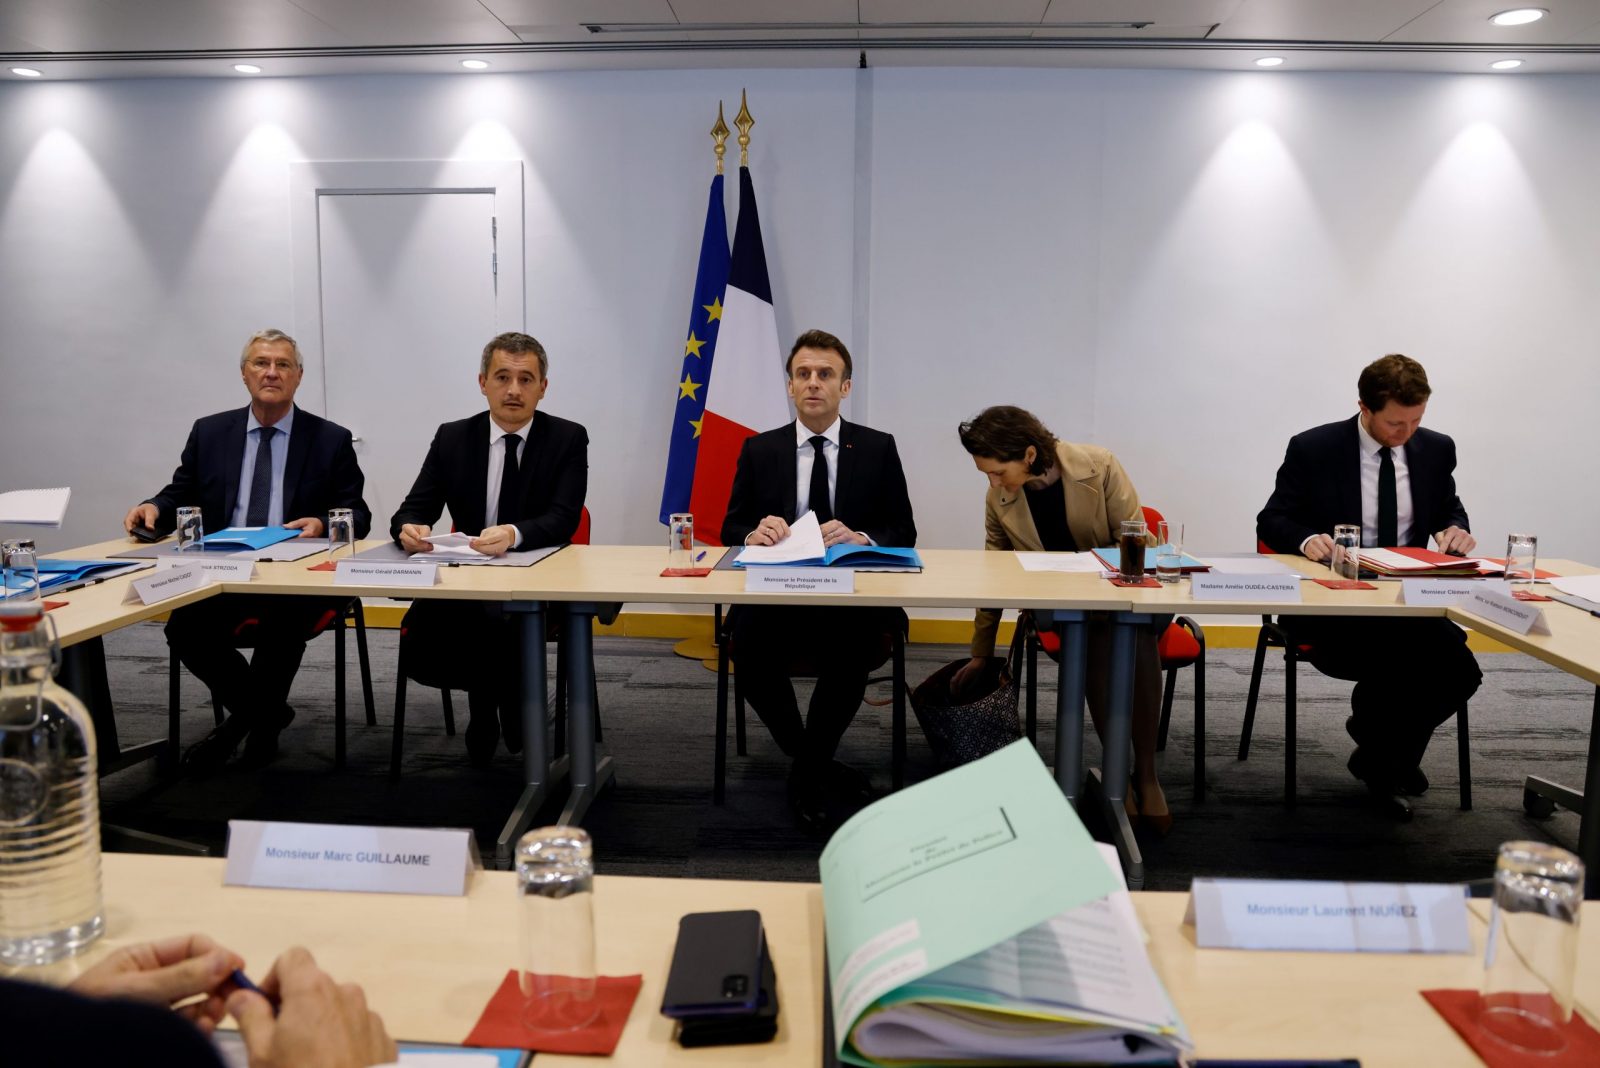 epa10522569 (L-R) French president's Chief of Staff Patrick Strzoda, French Interior and Overseas Minister Gerald Darmanin, French President Emmanuel Macron, French Sports Minister Amelie Oudea-Castera, and French Junior Minister for Transports Clement Beaune attend a working meeting 500 days ahead of the Paris 2024 Summer Olympic and Paralympic Games at the Paris and Ile-de-France Prefecture in Paris, France, 14 March 2023. The Paris 2024 Summer Olympics are held from 26 July to 11 Ausgust 2024.  EPA/LUDOVIC MARIN / POOL  MAXPPP OUT